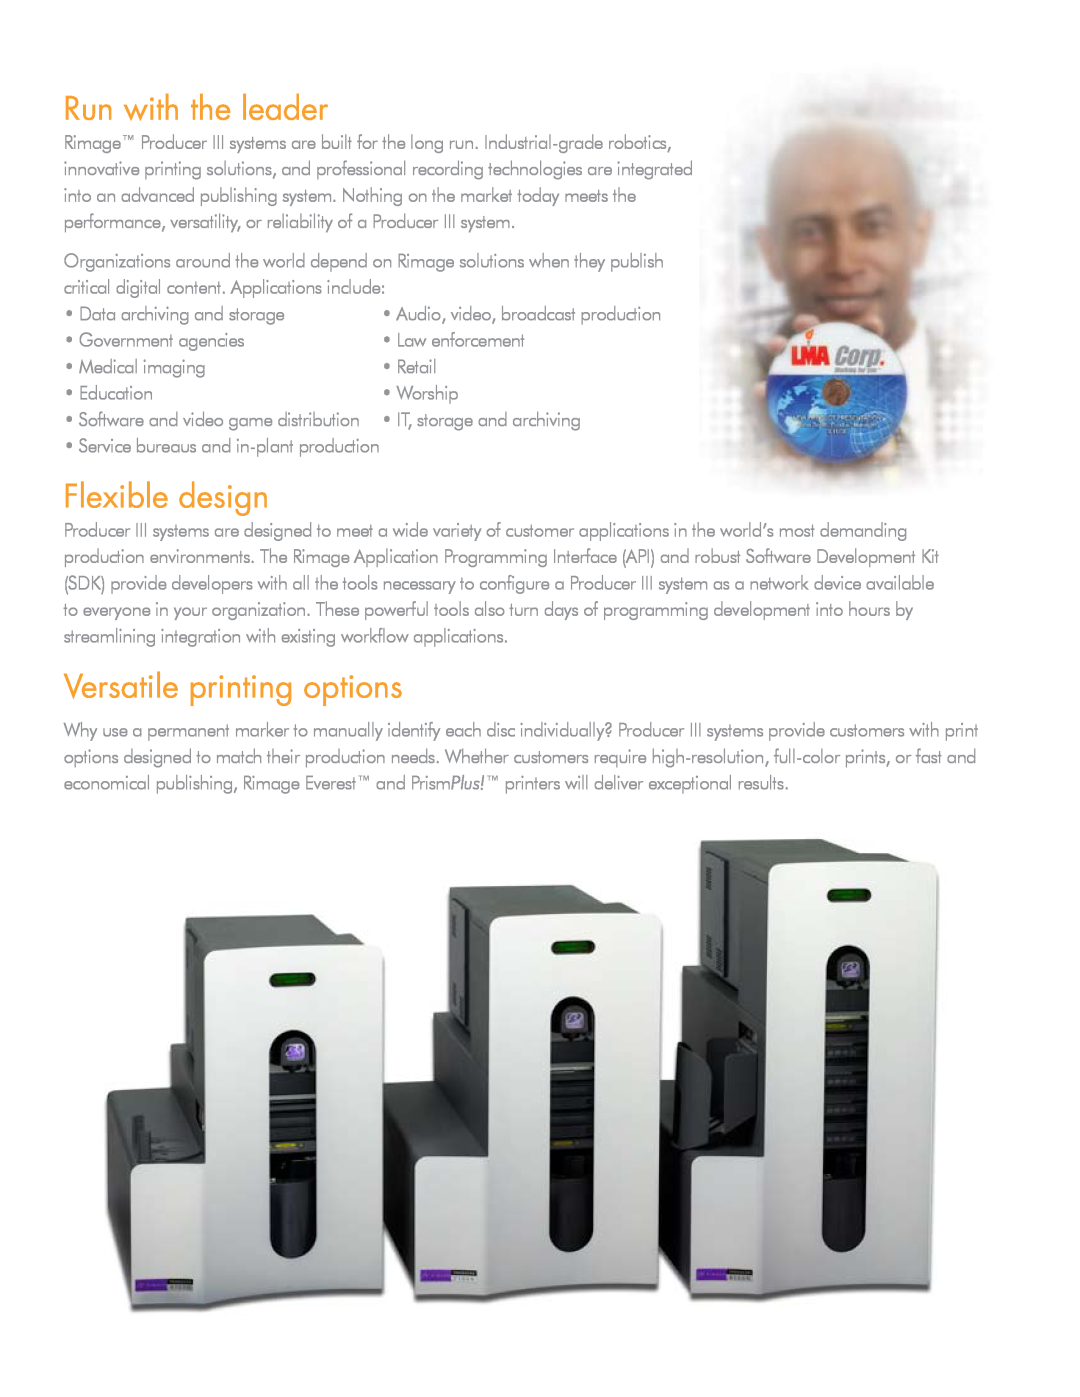 Rimage 6100N Run with the leader, Flexible design, Versatile printing options, Data archiving and storage, Law enforcement 